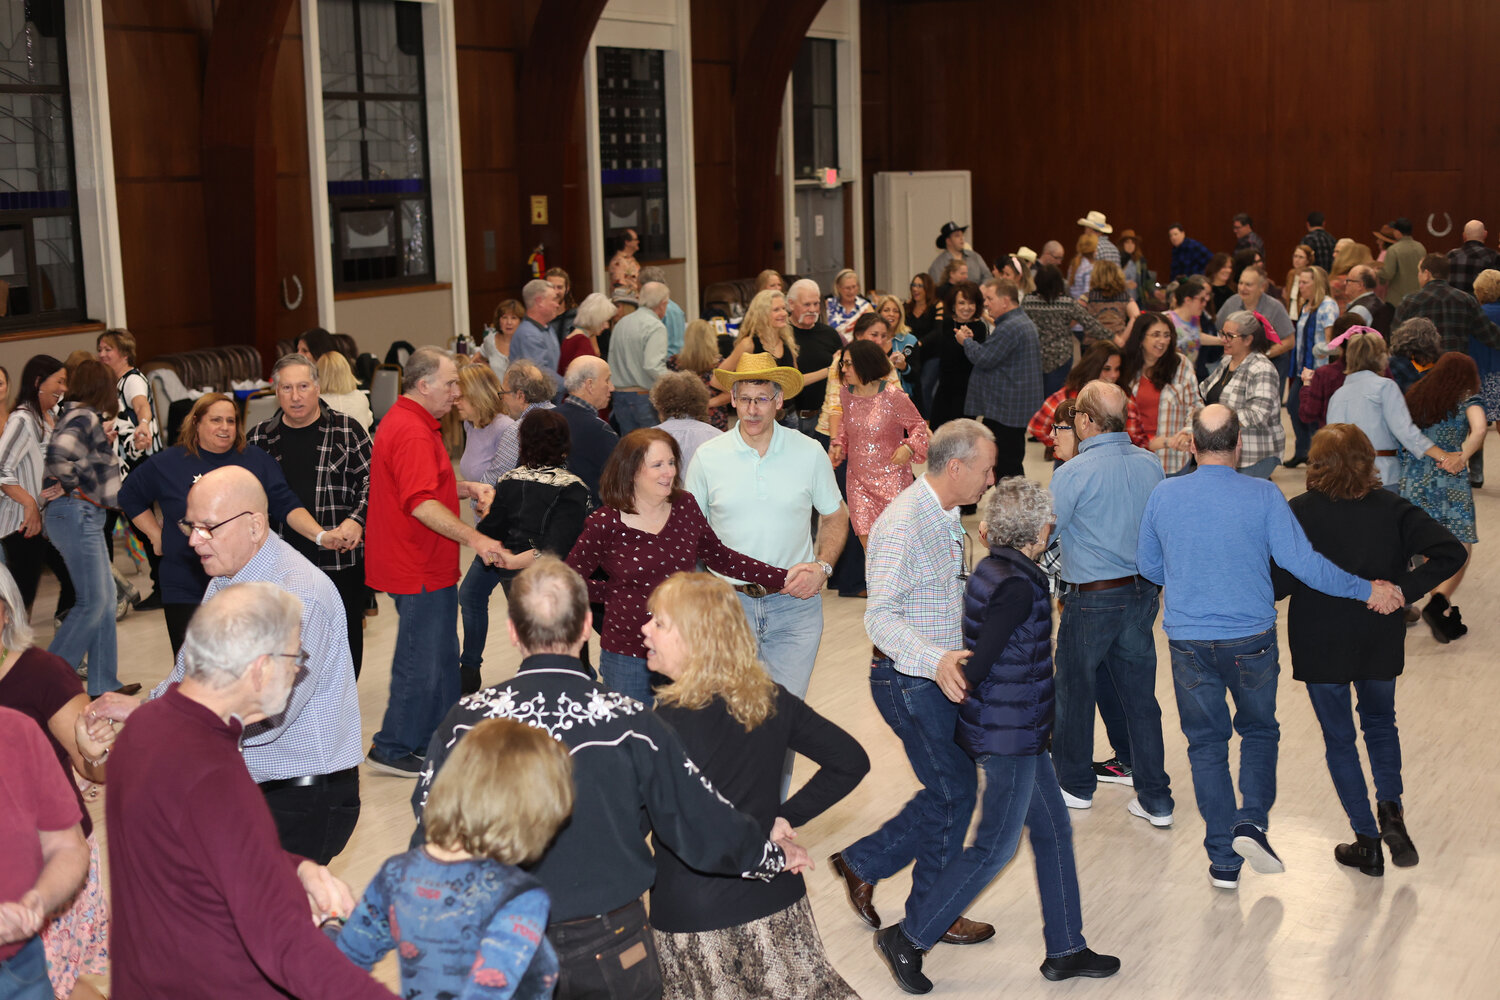 A large crowd gathered at Temple B’Nai Torah in Wantagh on Jan. 27 to enjoy a music-filled night of square and line dancing.